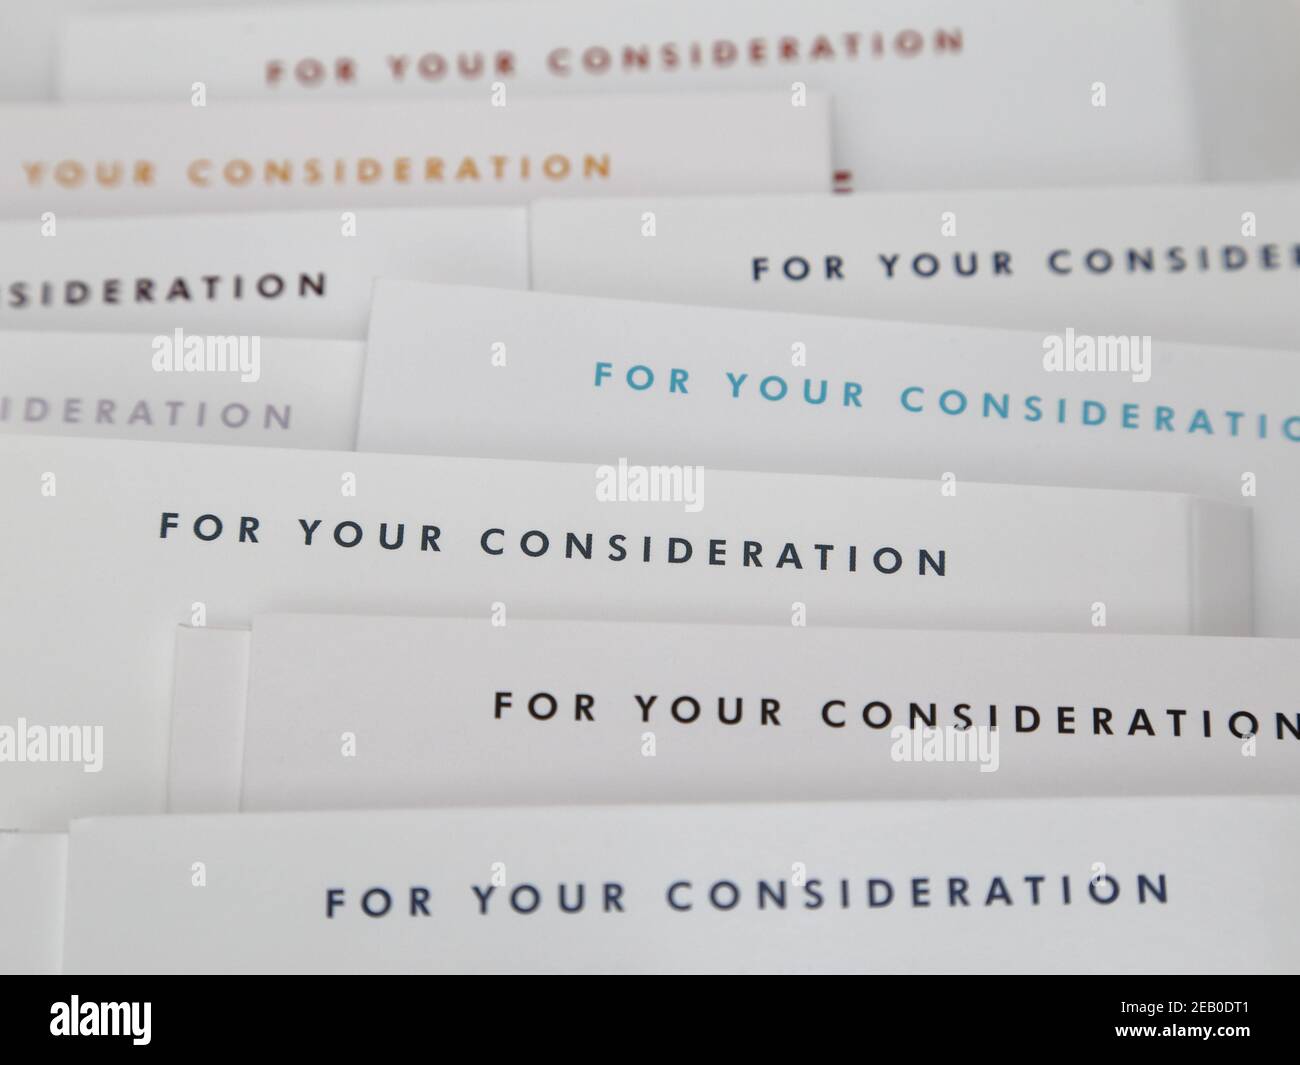 A pile of DVD movie and TV show screener jackets displaying “FOR YOUR CONSIDERATION” is shown up close. Stock Photo